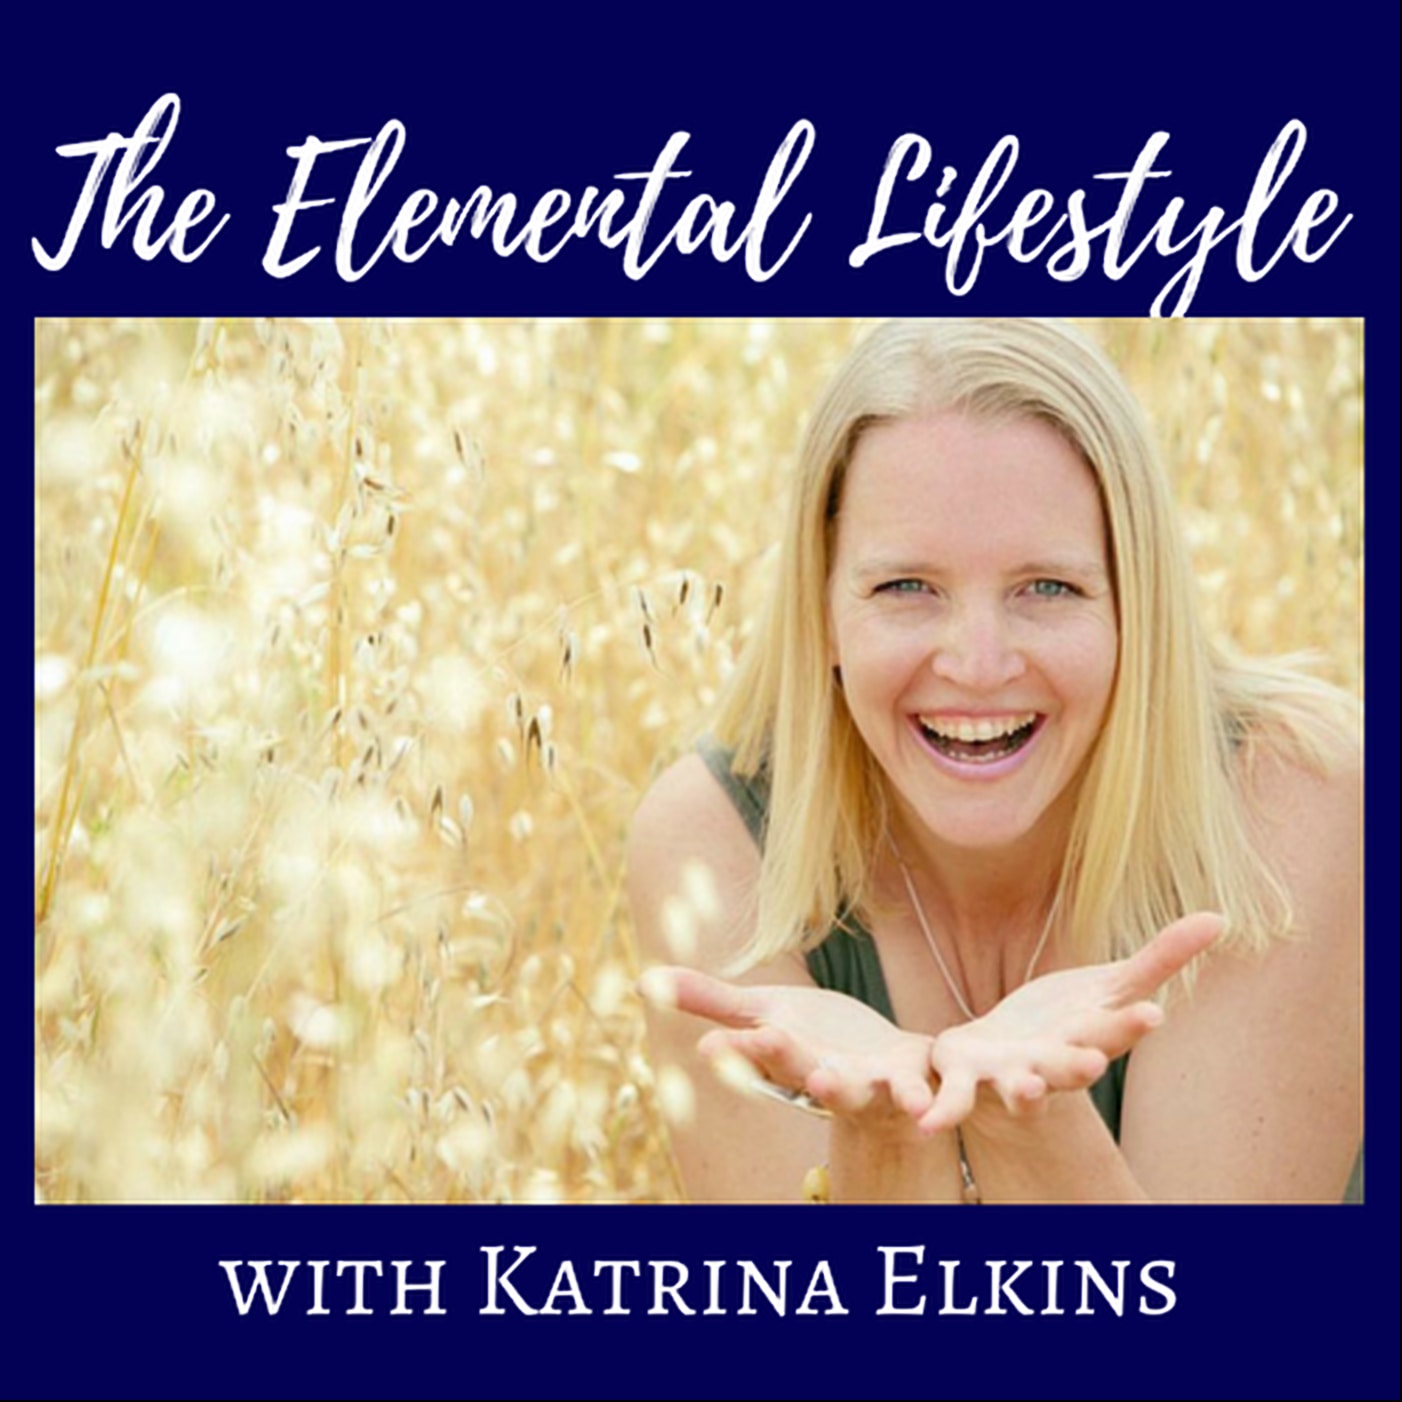 Katrina Elkins "The Elemental Lifestyle is now a Podcast" on The Erica Glessing Show Podcast #2123